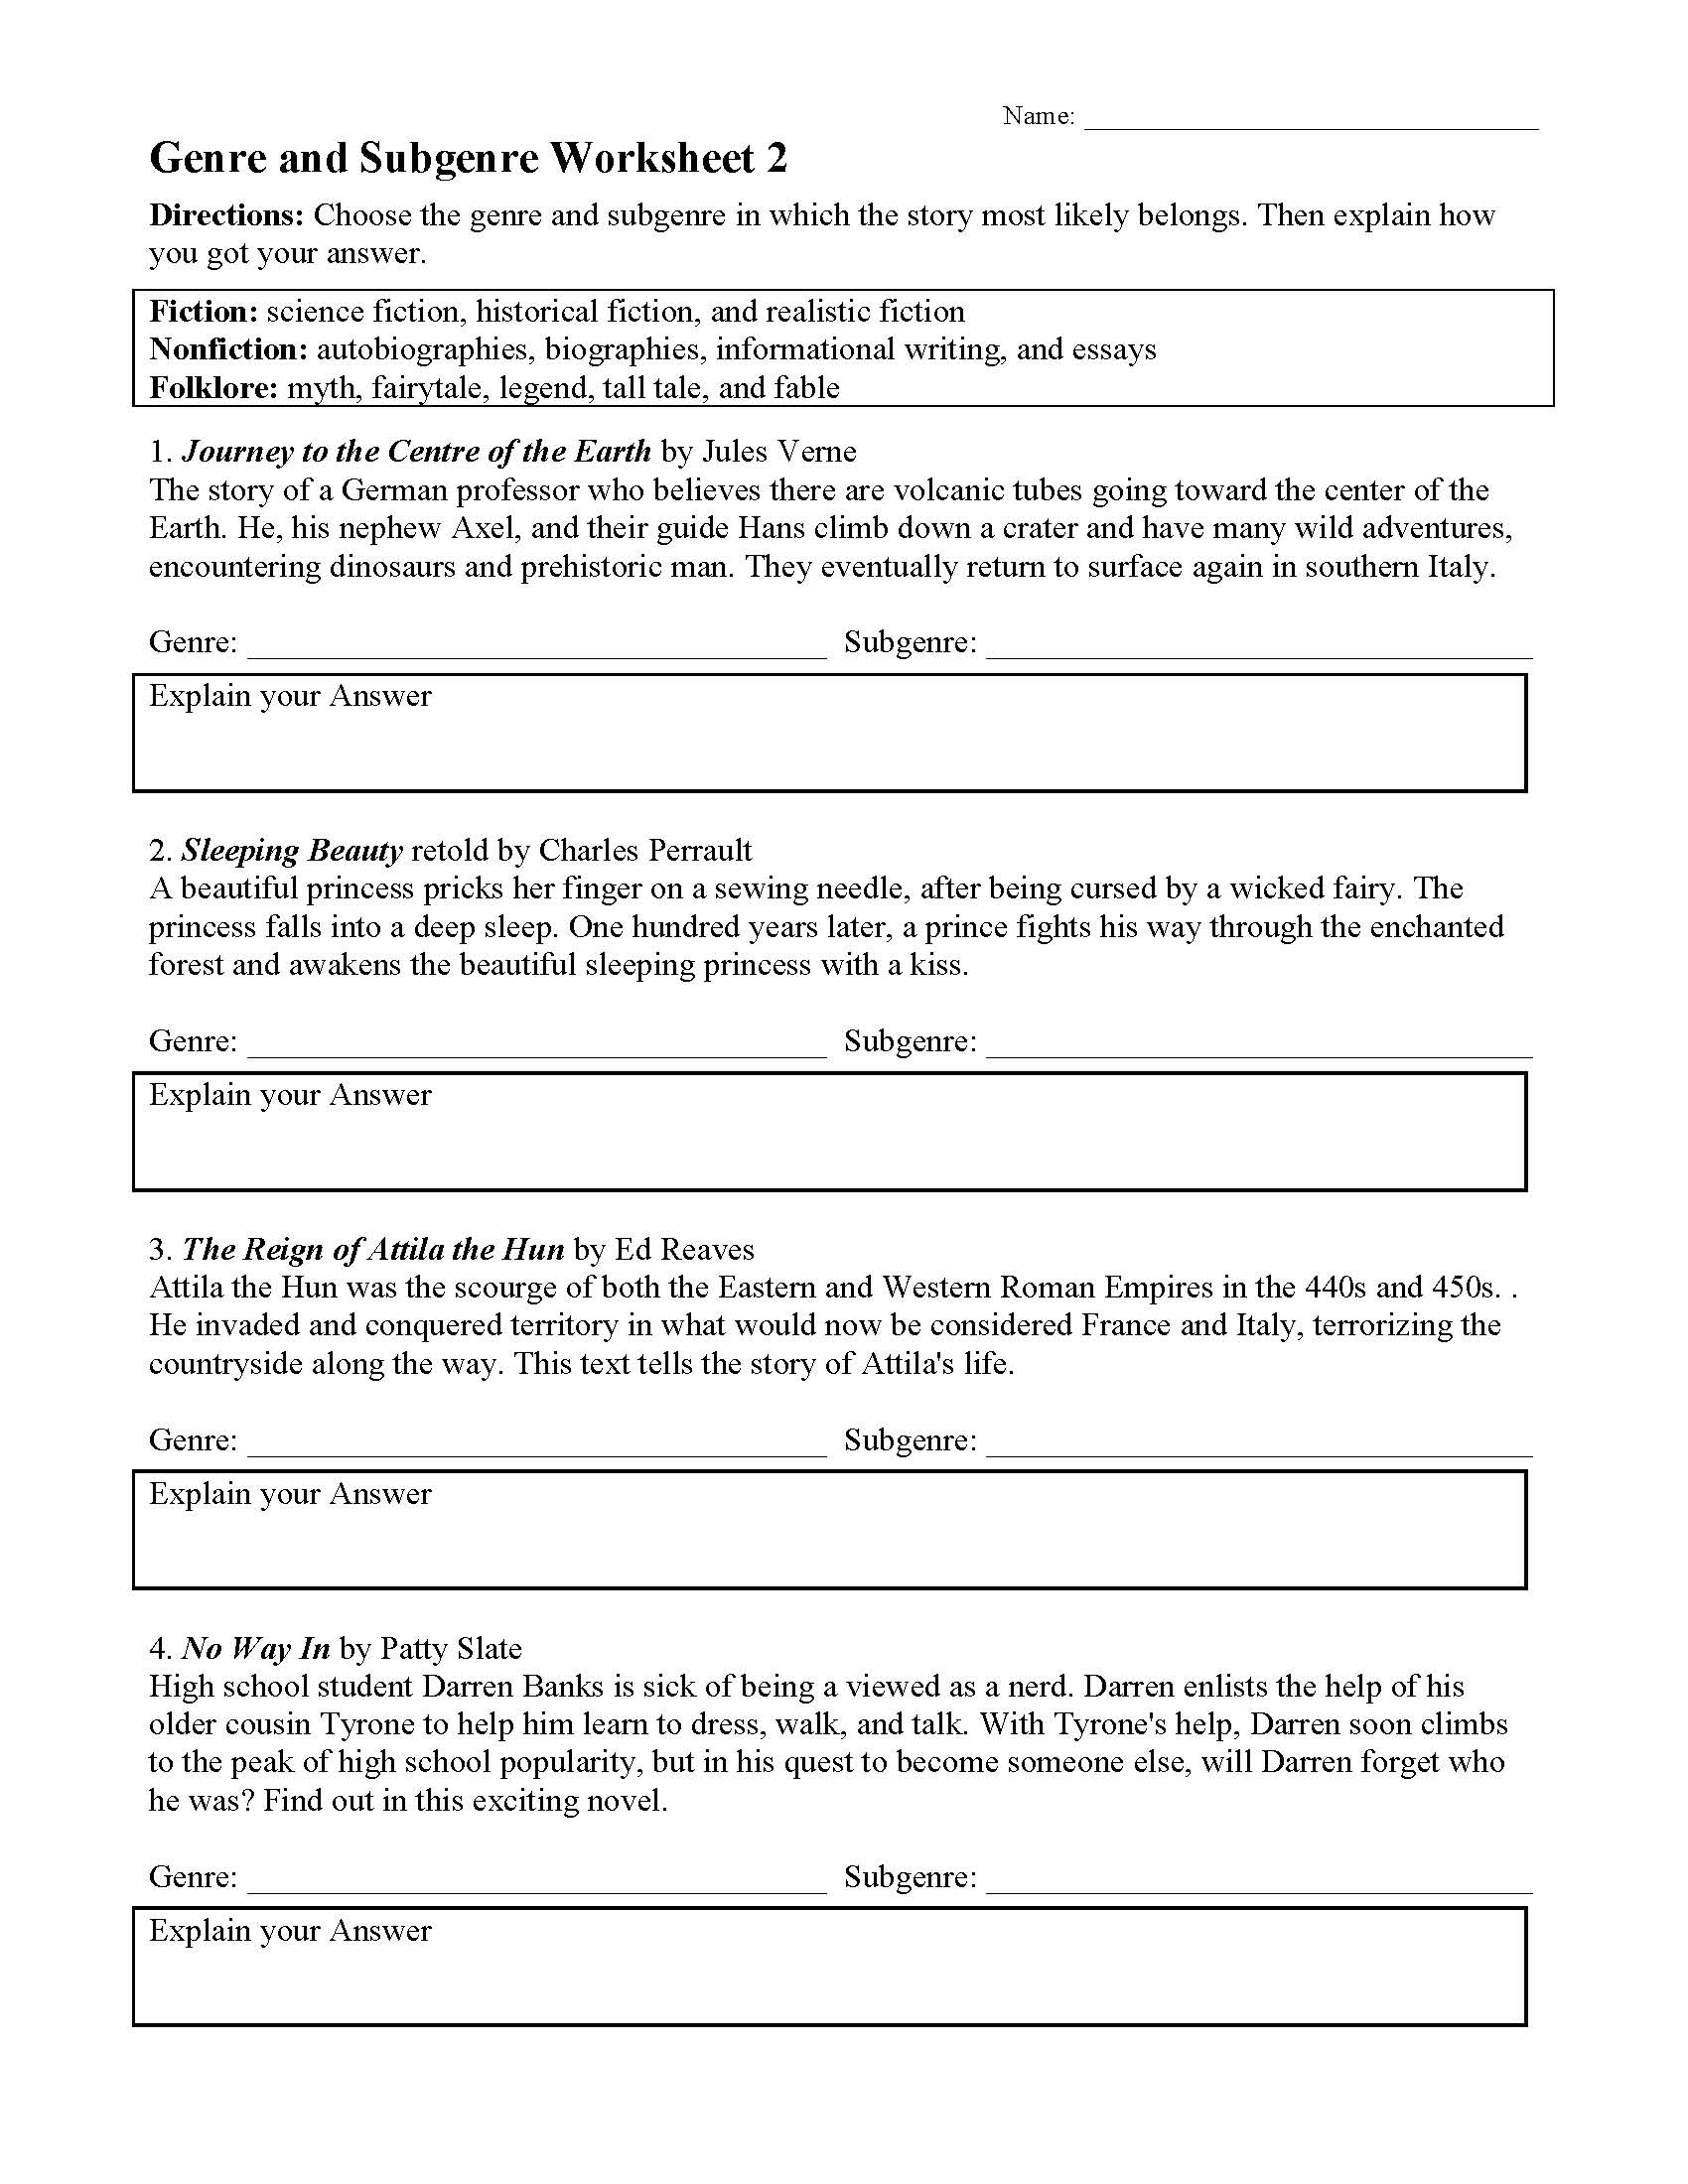 This is a preview image of Genre Worksheet 2. Click on it to enlarge it or view the source file.